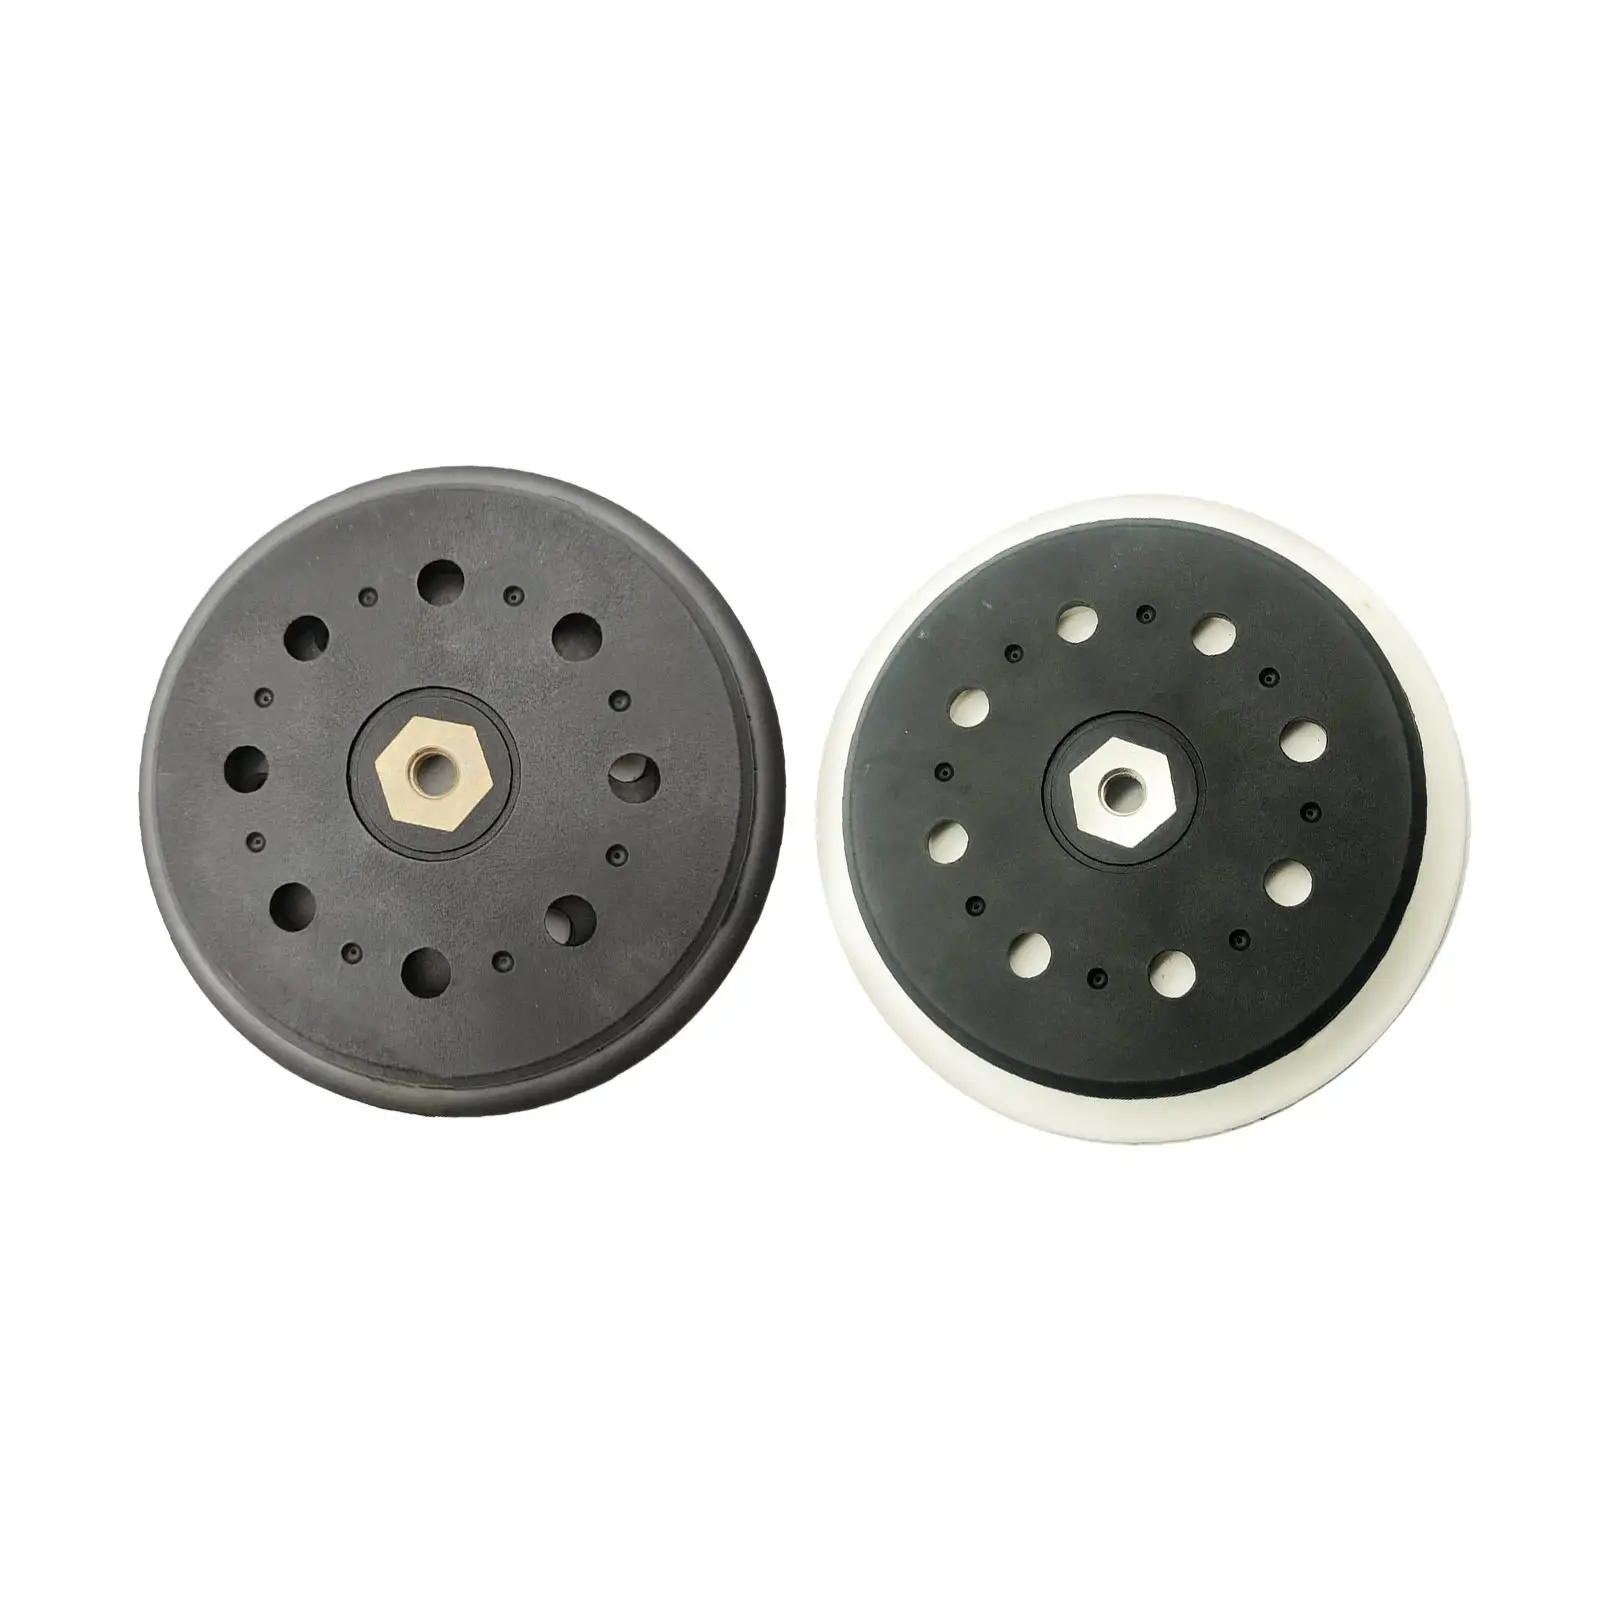 15 Hole Sander Sanding Disc 6 Inches Backing Grinding Polishing Pad Disc Durable Sander Polisher Tool for Polisher Woodworking